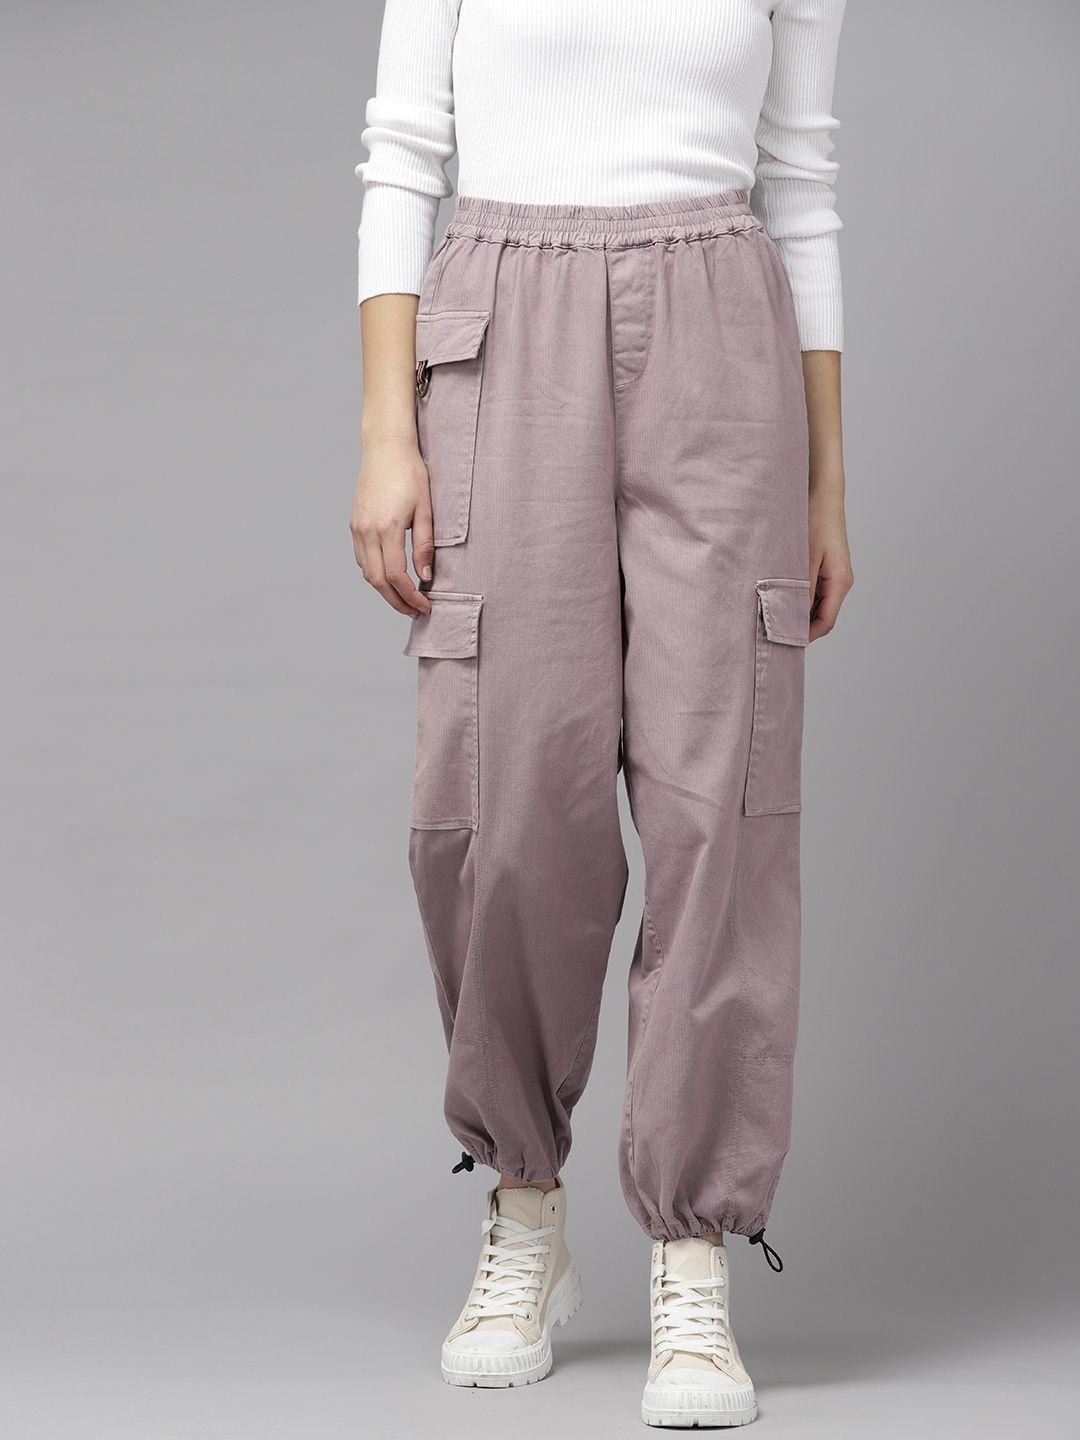 the roadster lifestyle co. women cargos trousers